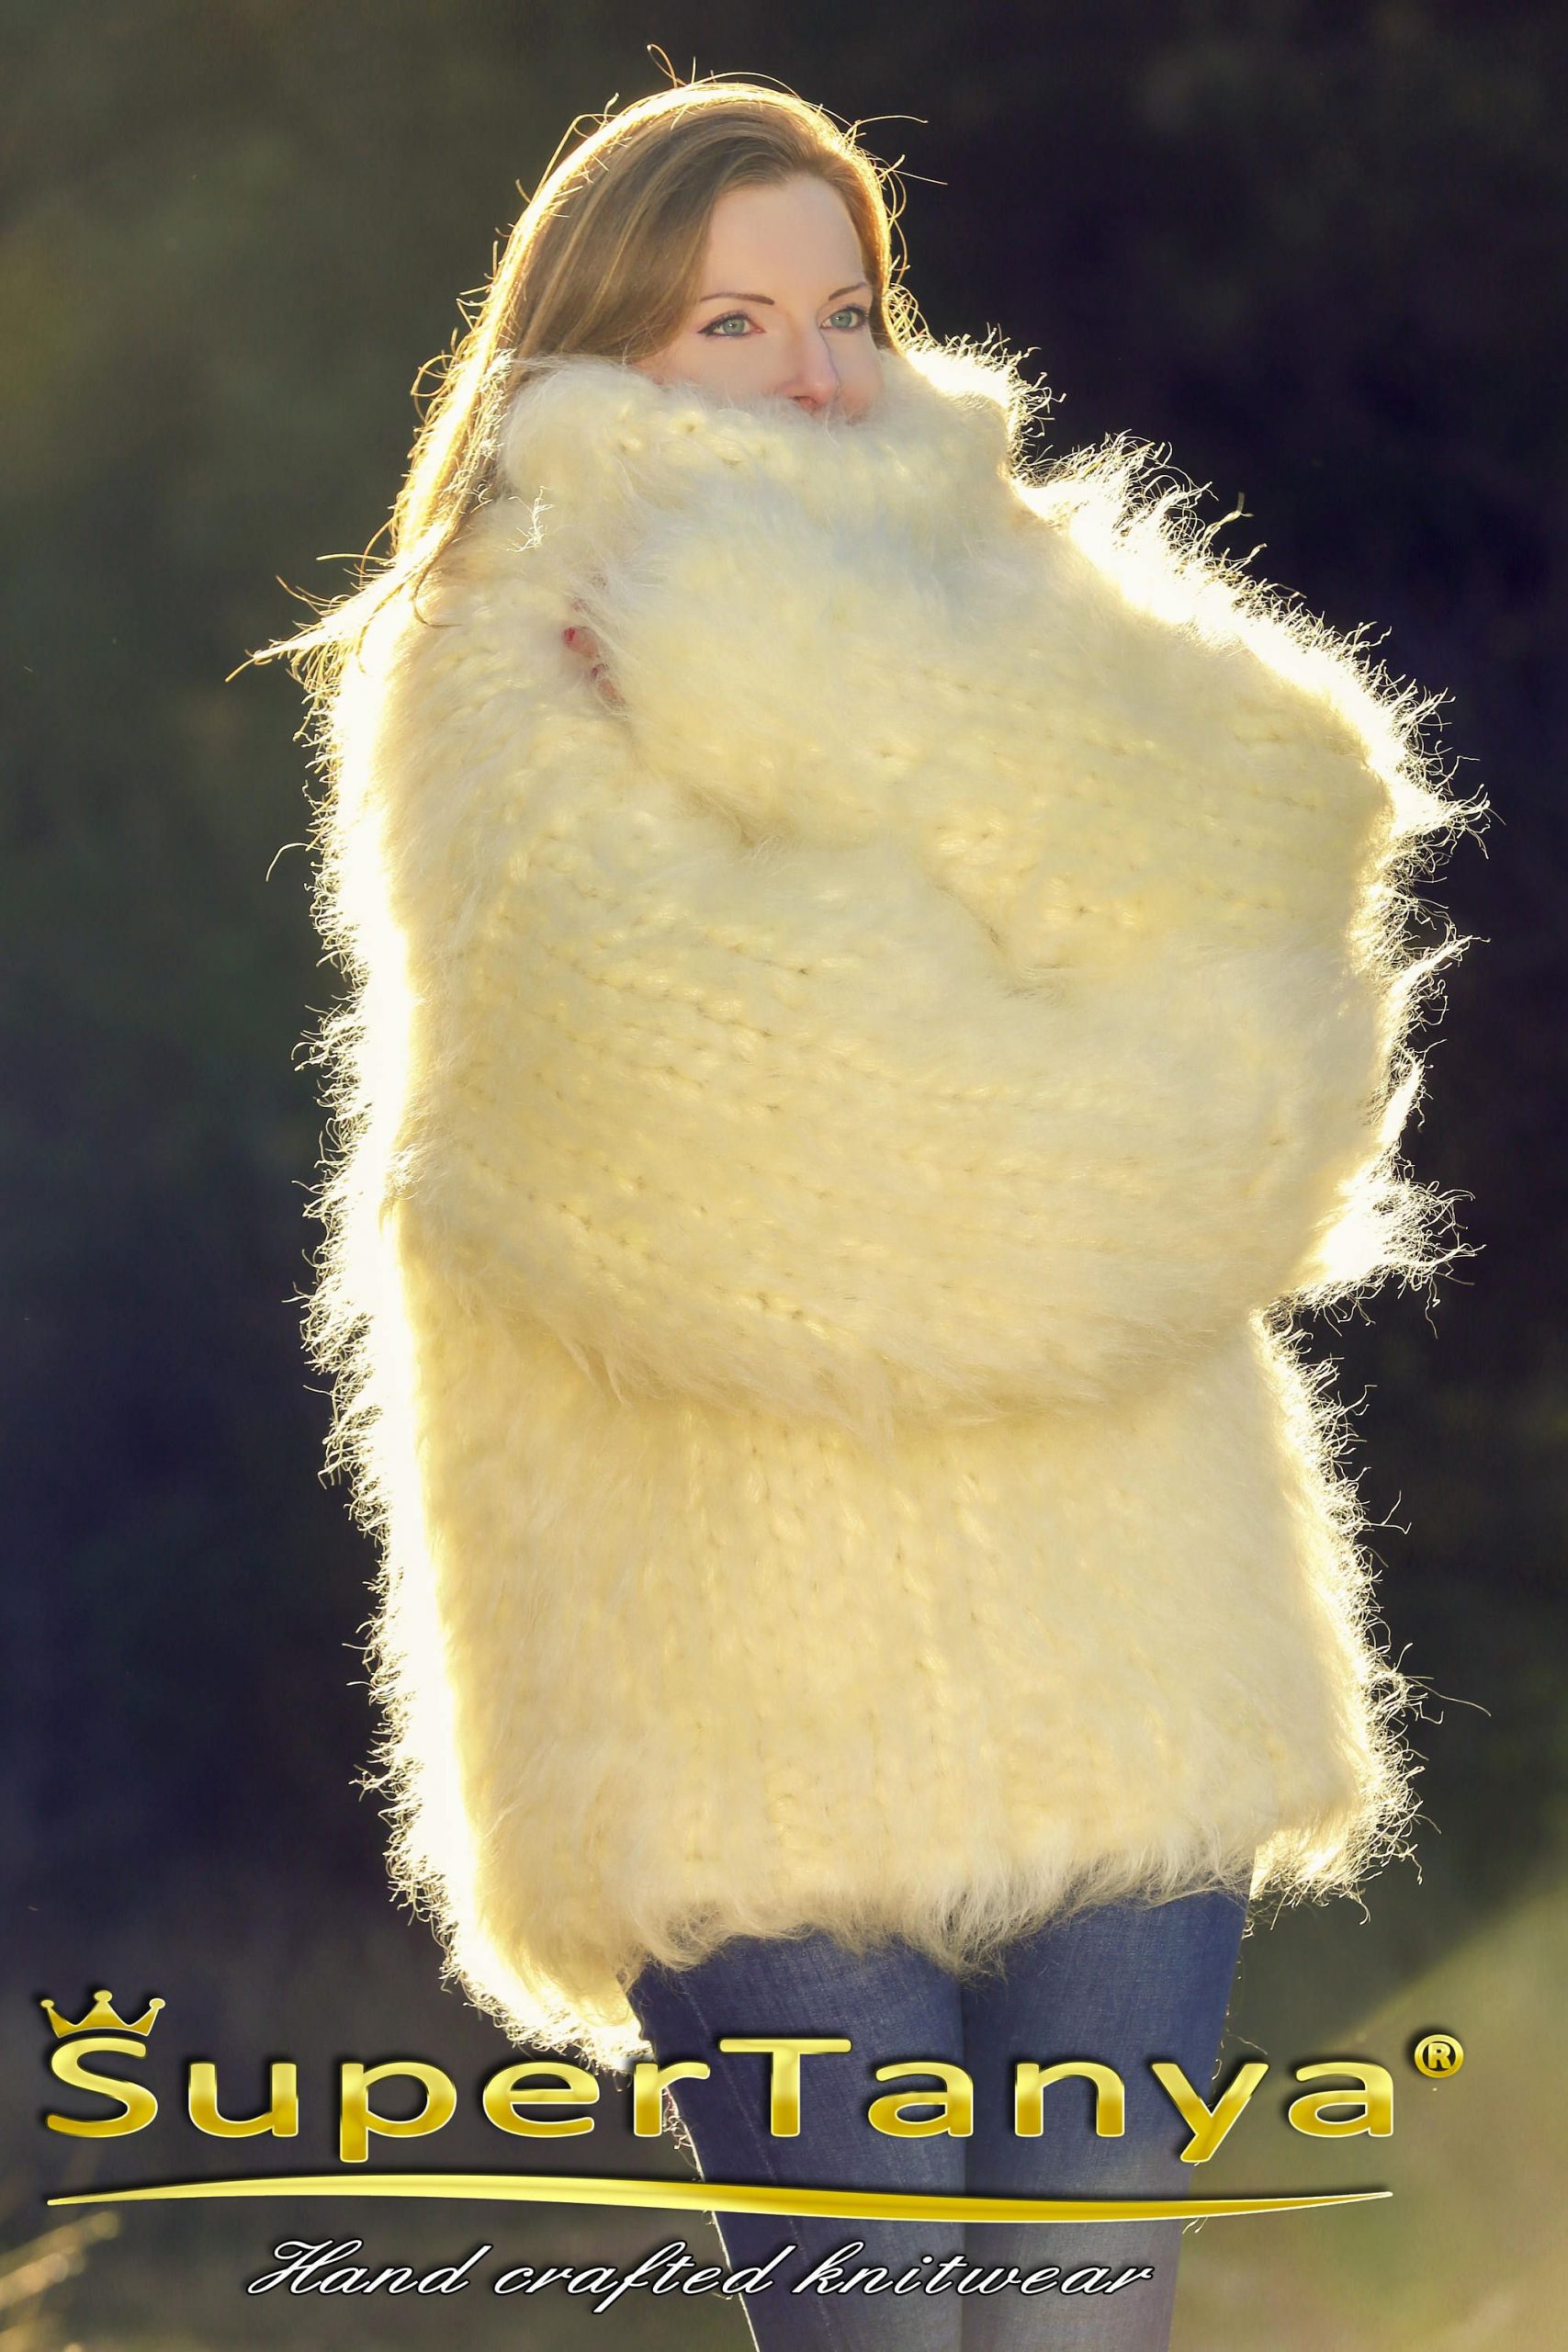 32-STRANDS-Mega-thick-and-fuzzy-hand-knitted-mohair-sweater.jpg